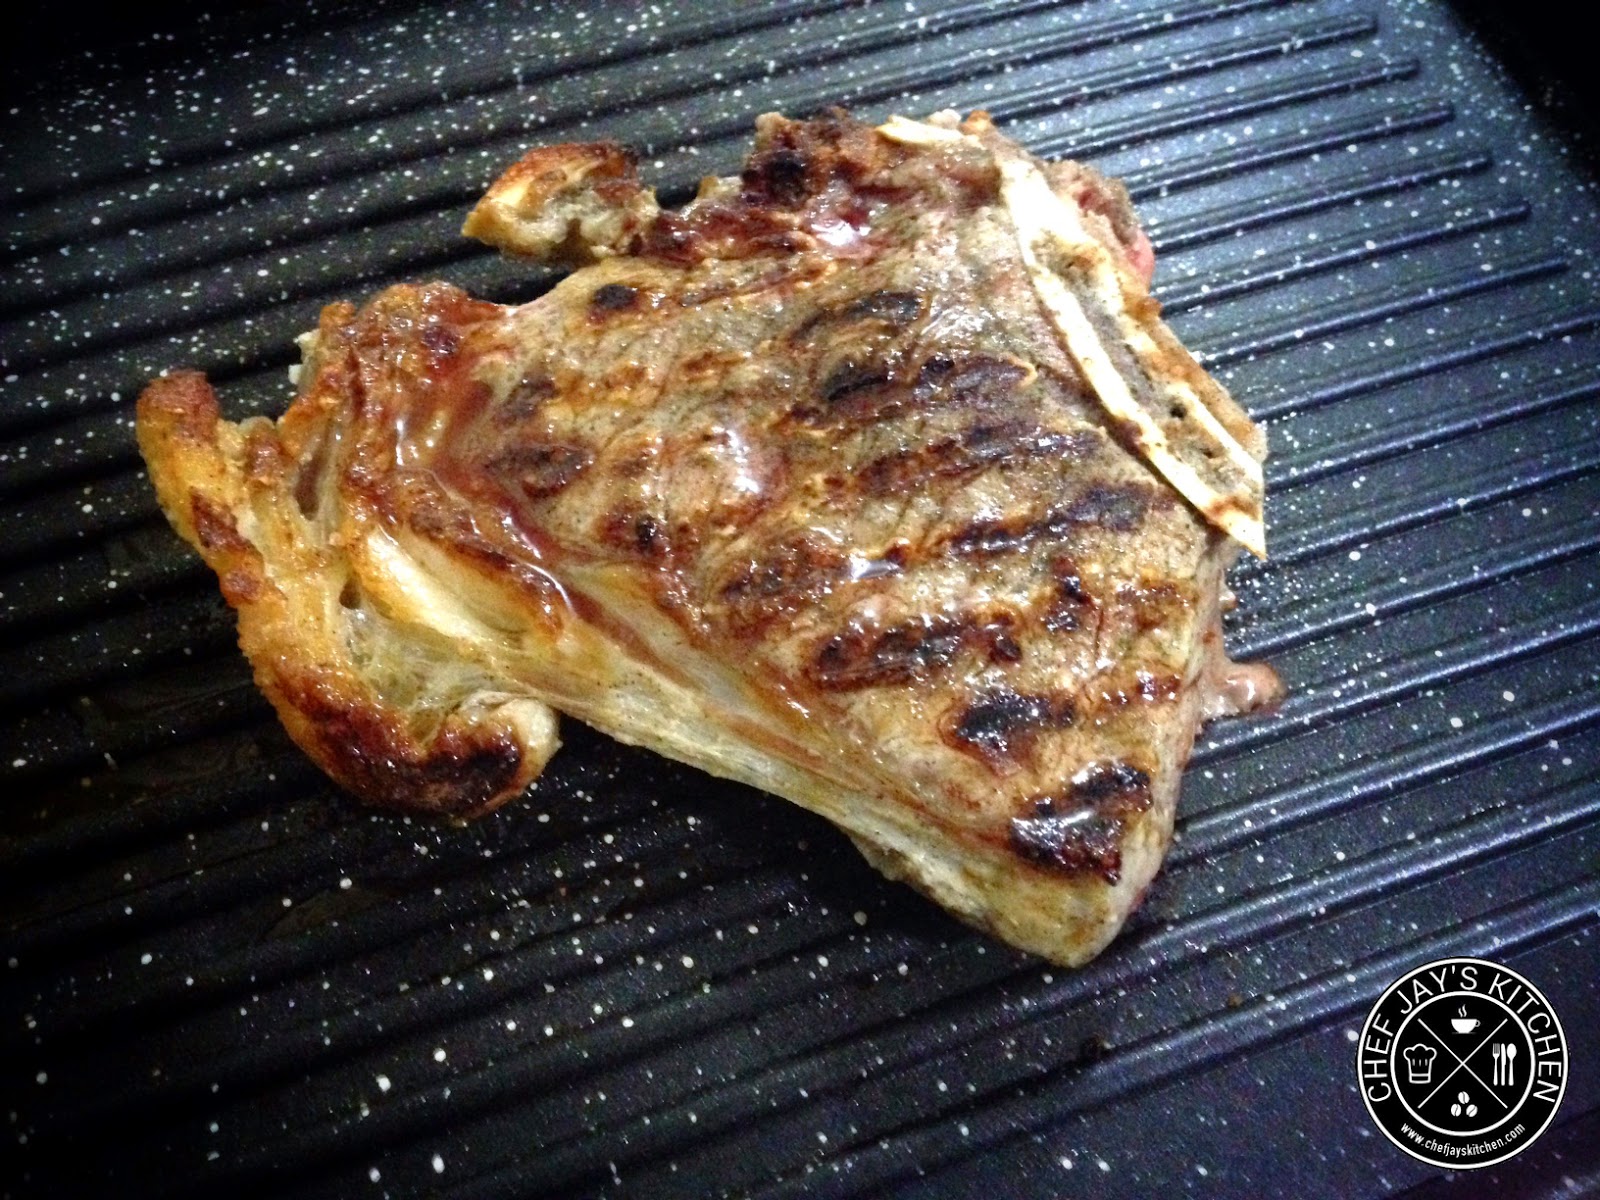 Here's How to Grill a Simple, Delicious T-Bone Steak